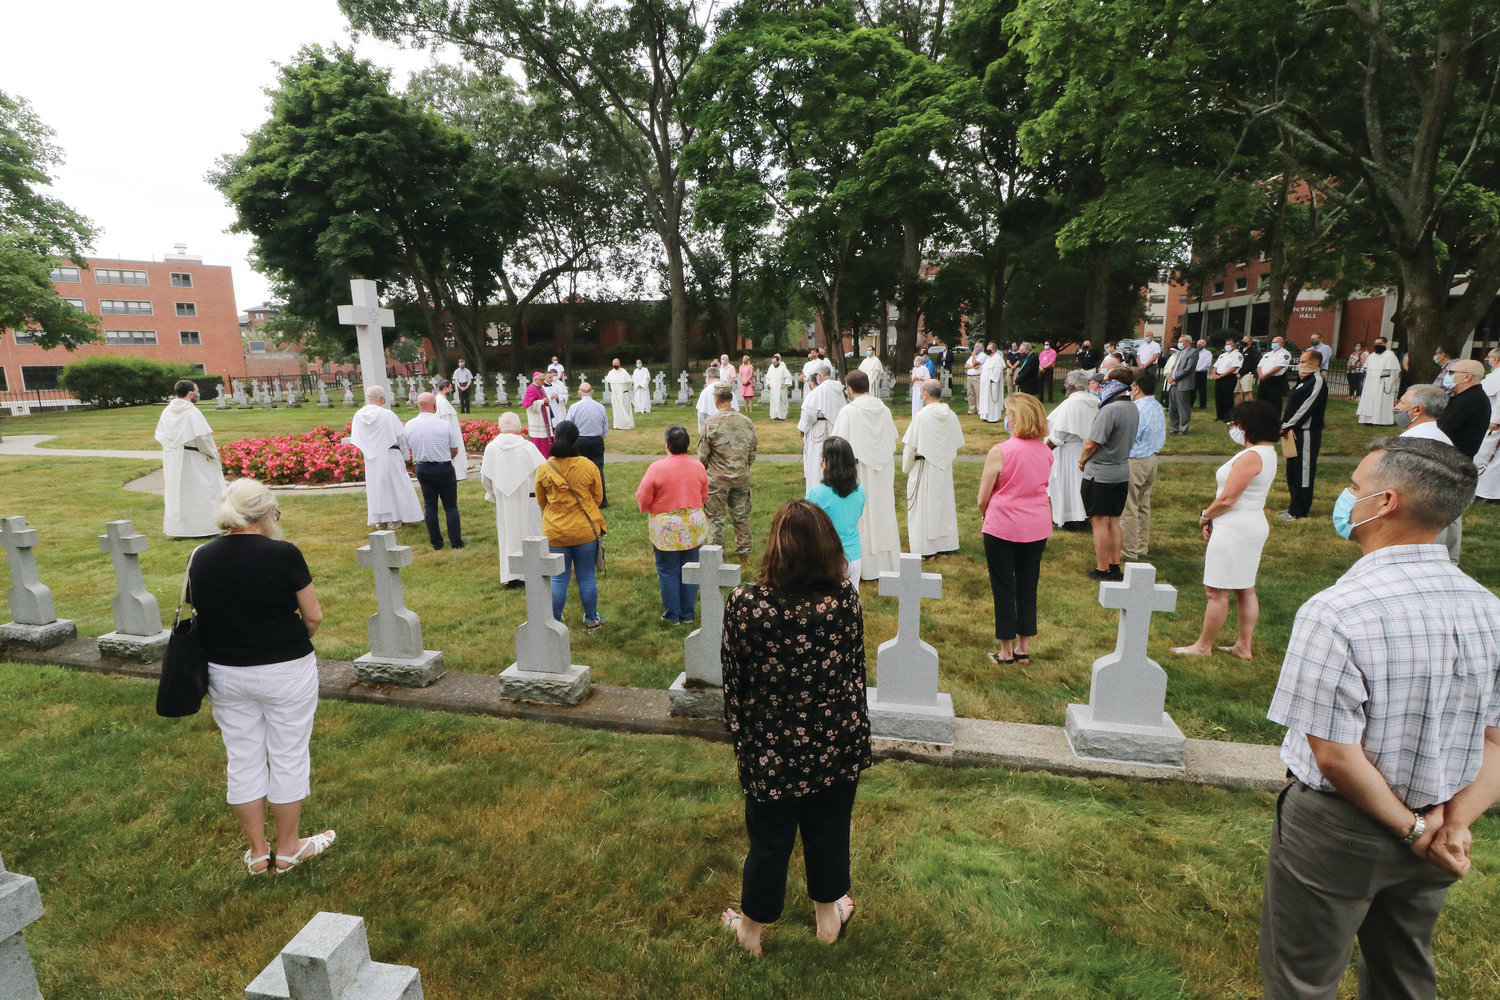 About 75 friars and members of the Providence College community gathered for the solemn ceremony during which Bishop Thomas J. Tobin blessed the grounds with holy water and incense — including the large granite crucifix standing in a garden of flowers at the center of the cemetery — as he offered prayers of consecration.